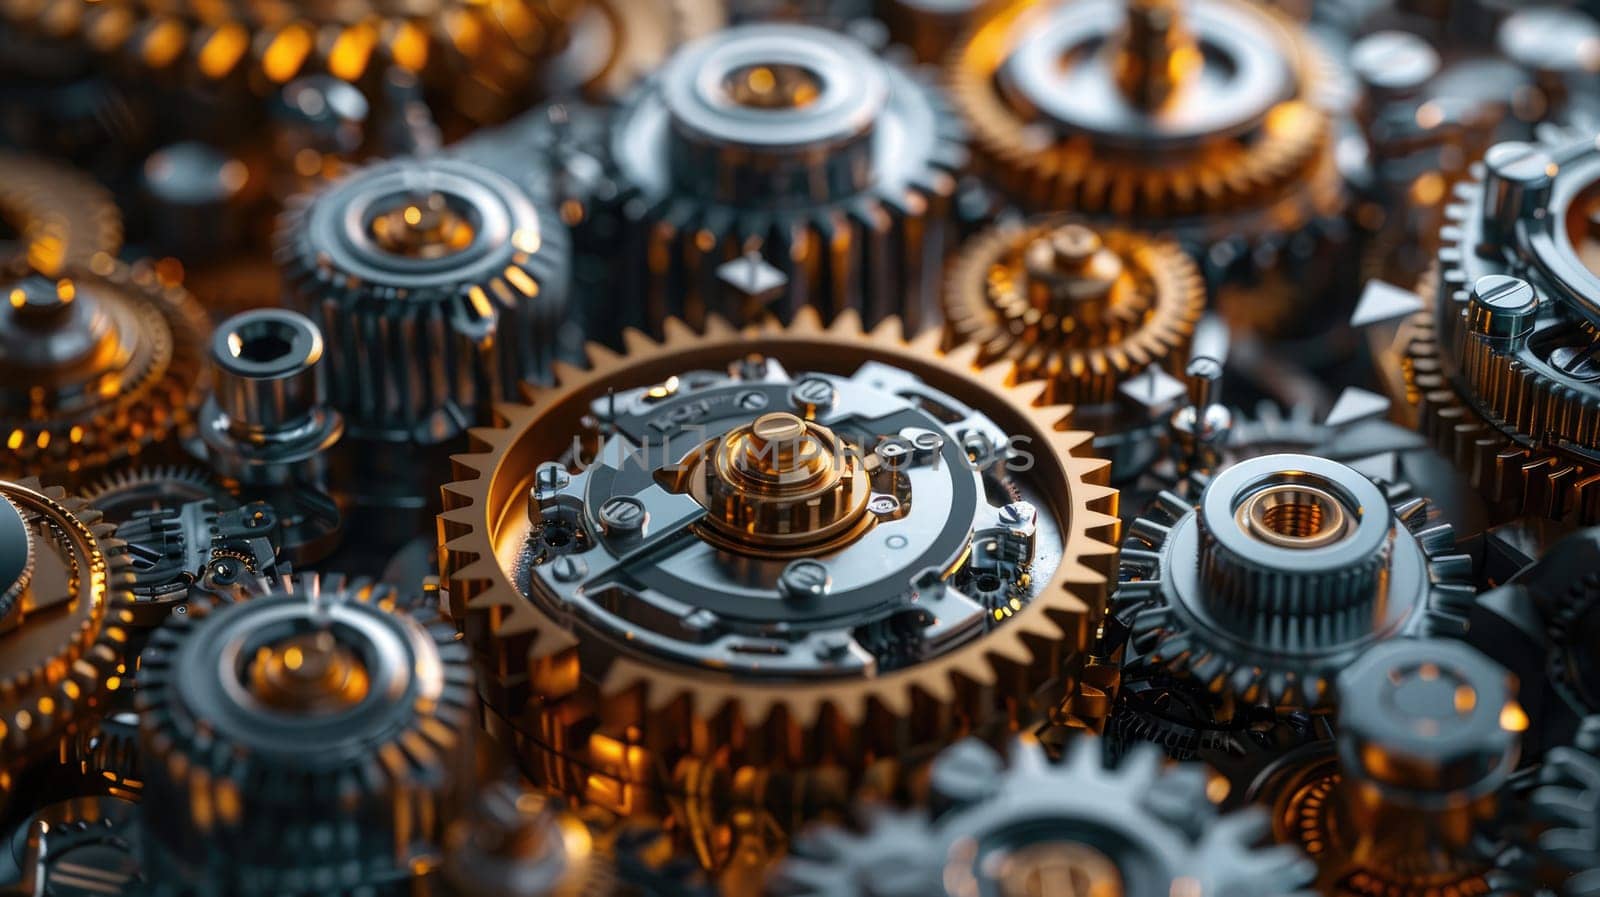 A close up of a large number of gears, some of which are gold.